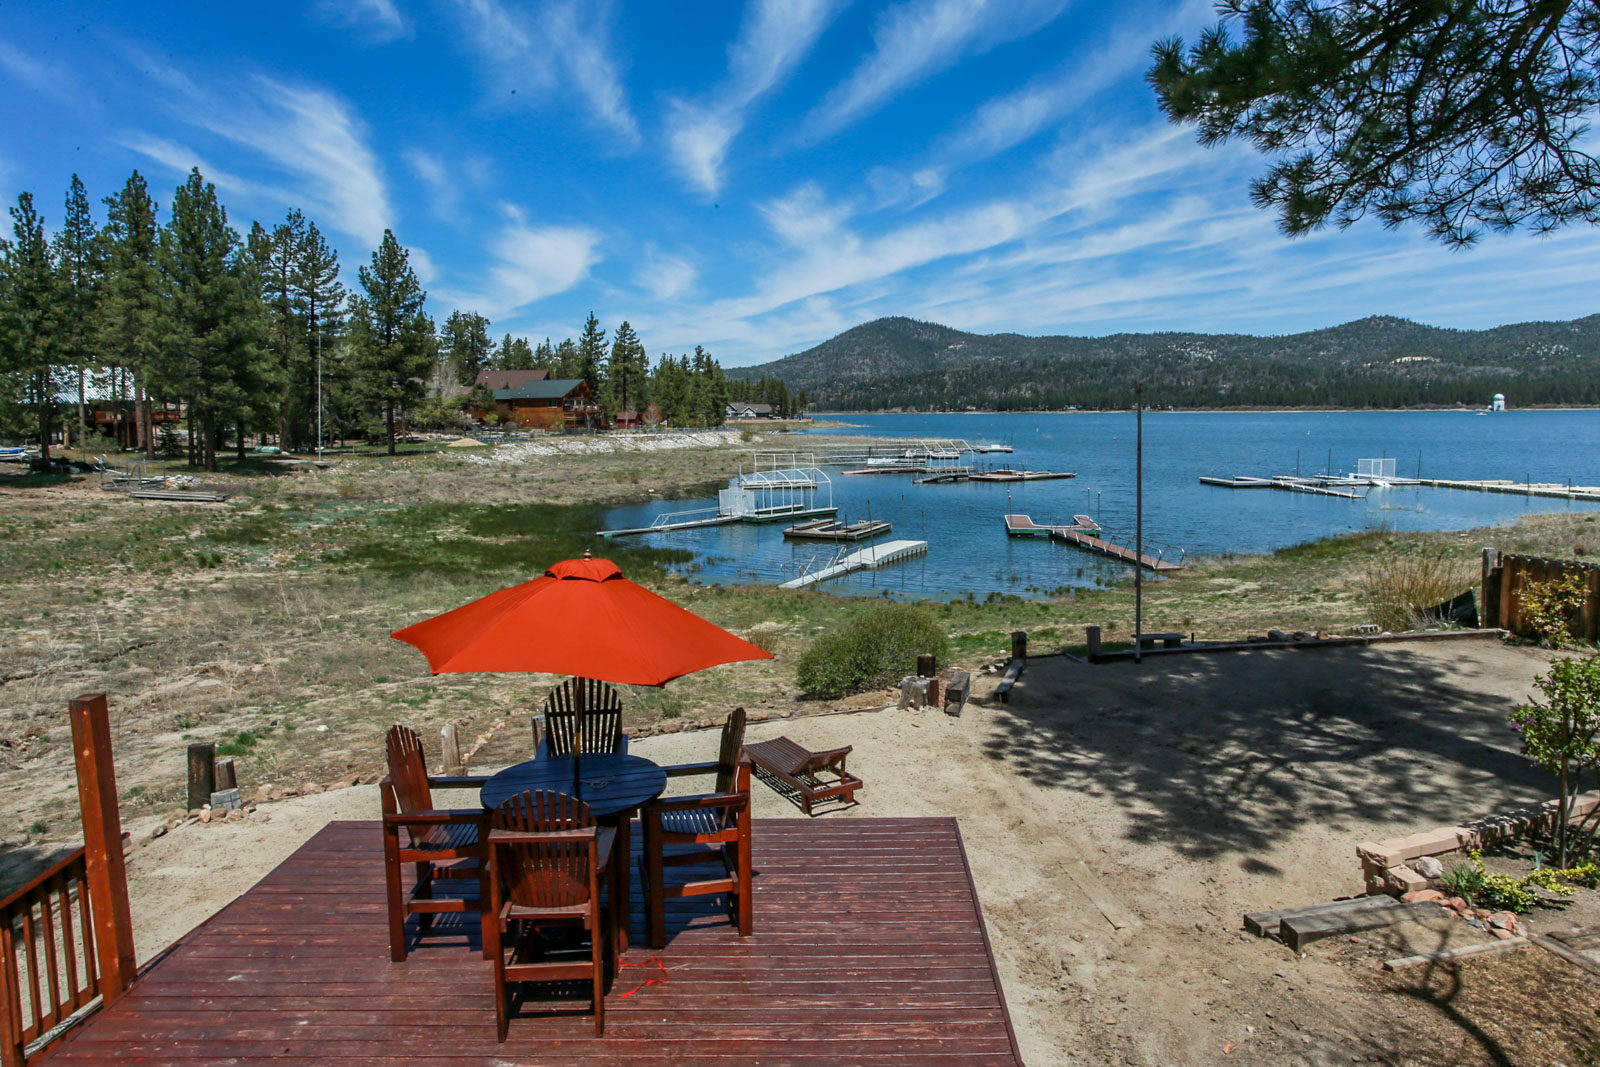 vacation rentals united states california images fav_touch_icons favicon_t.png vacation rentals united states california big bear lake